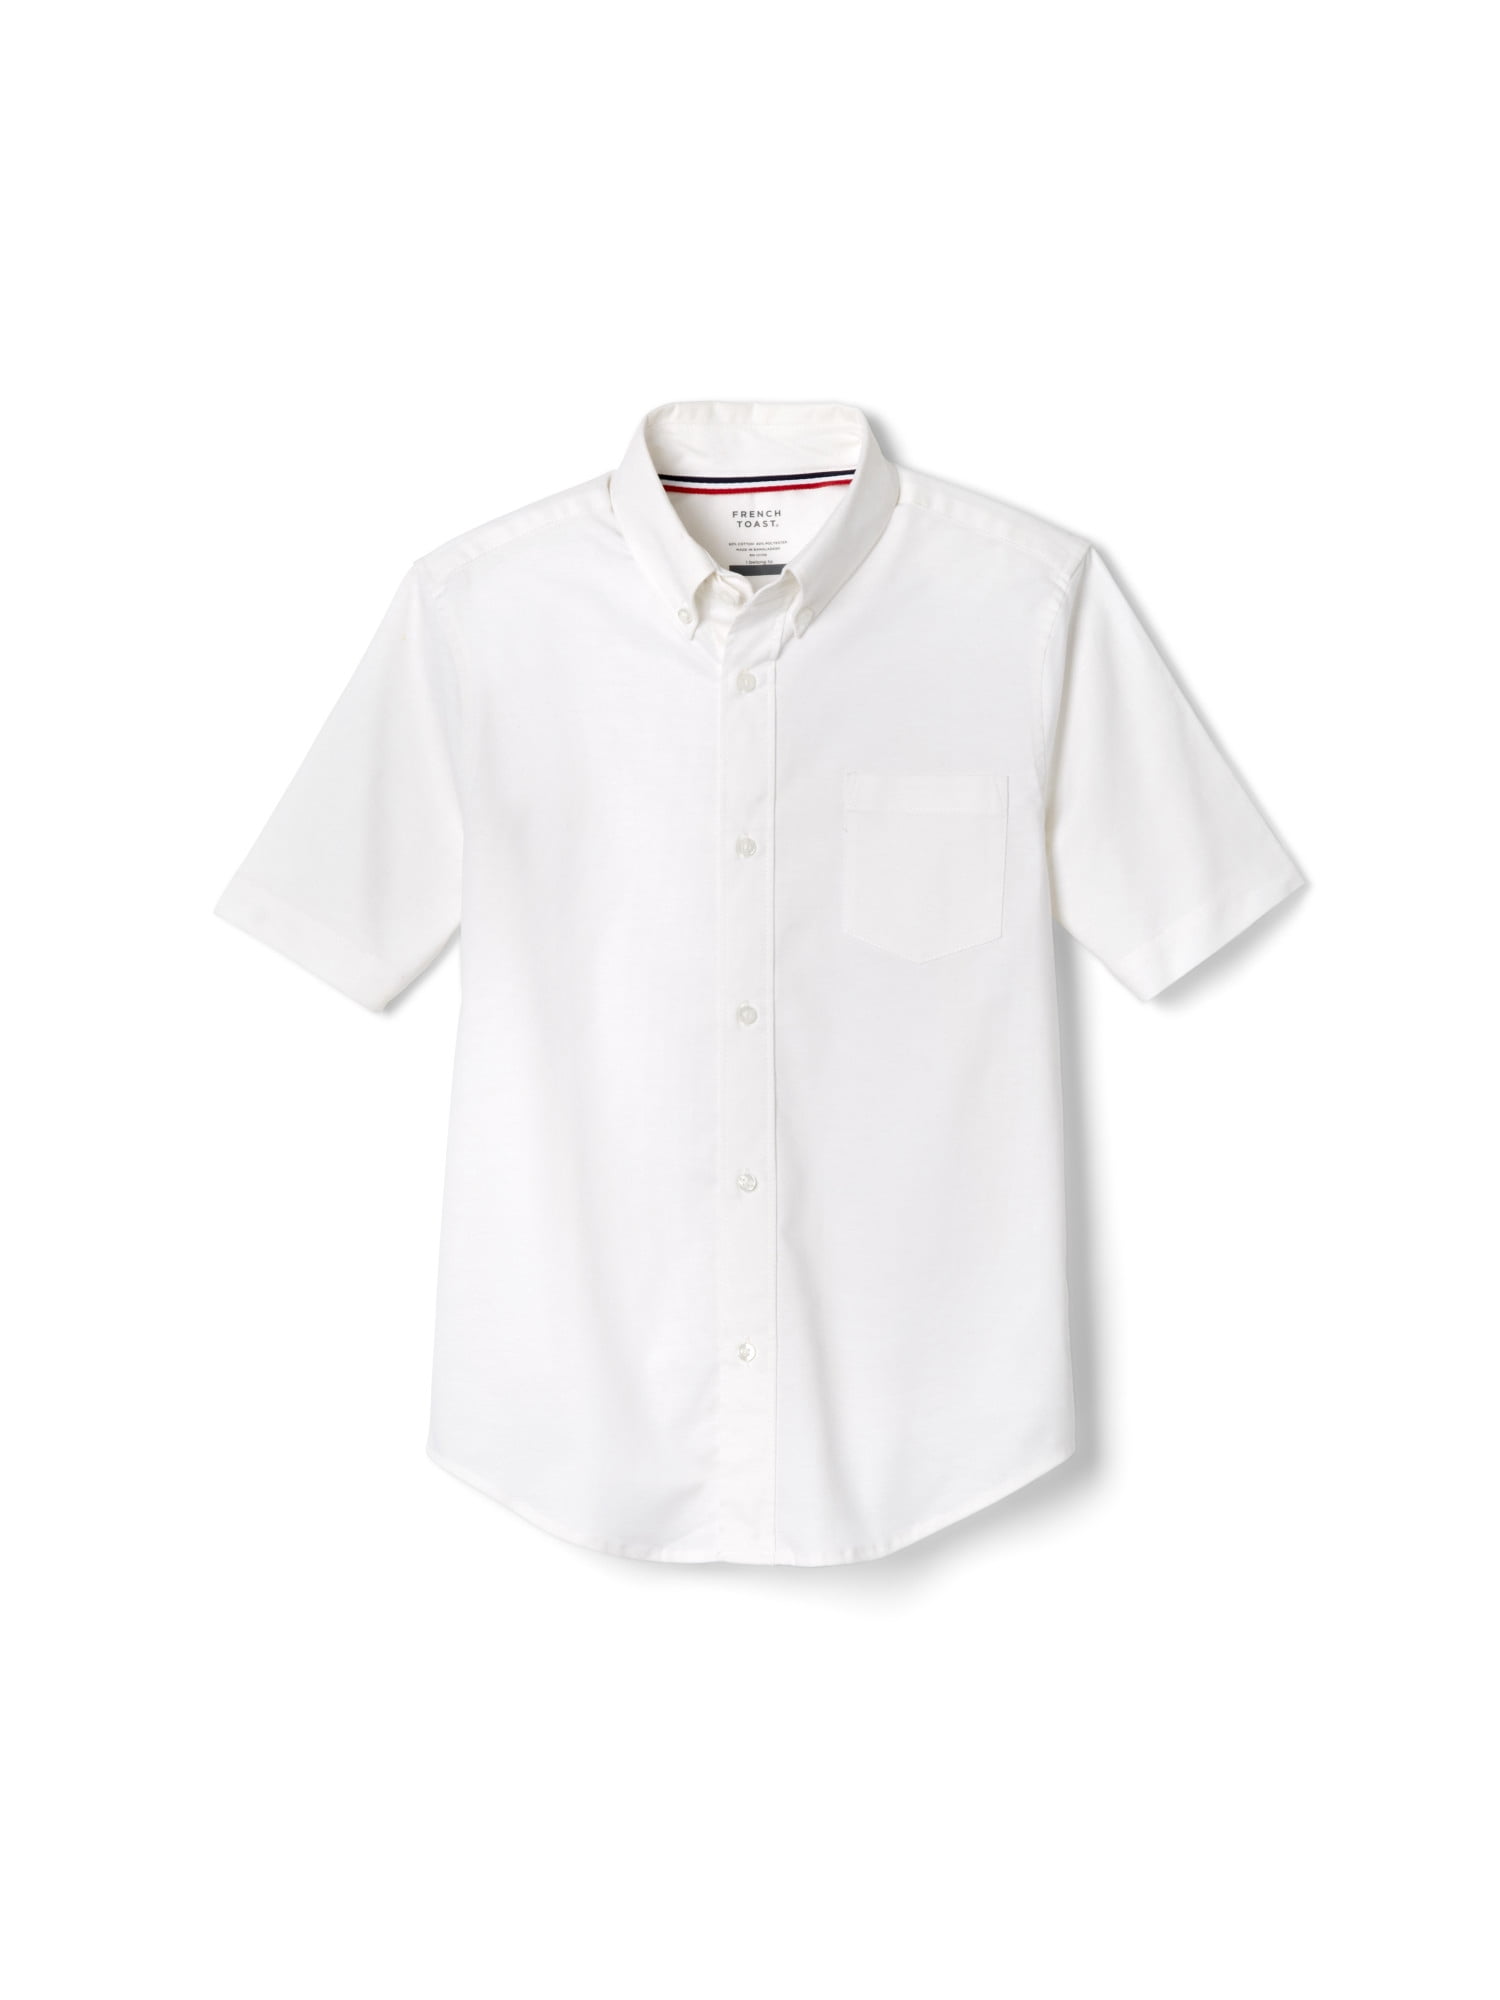 Ivory Boys Party Special Event Short Sleeve Dress Shirt Size: 4 to 14 